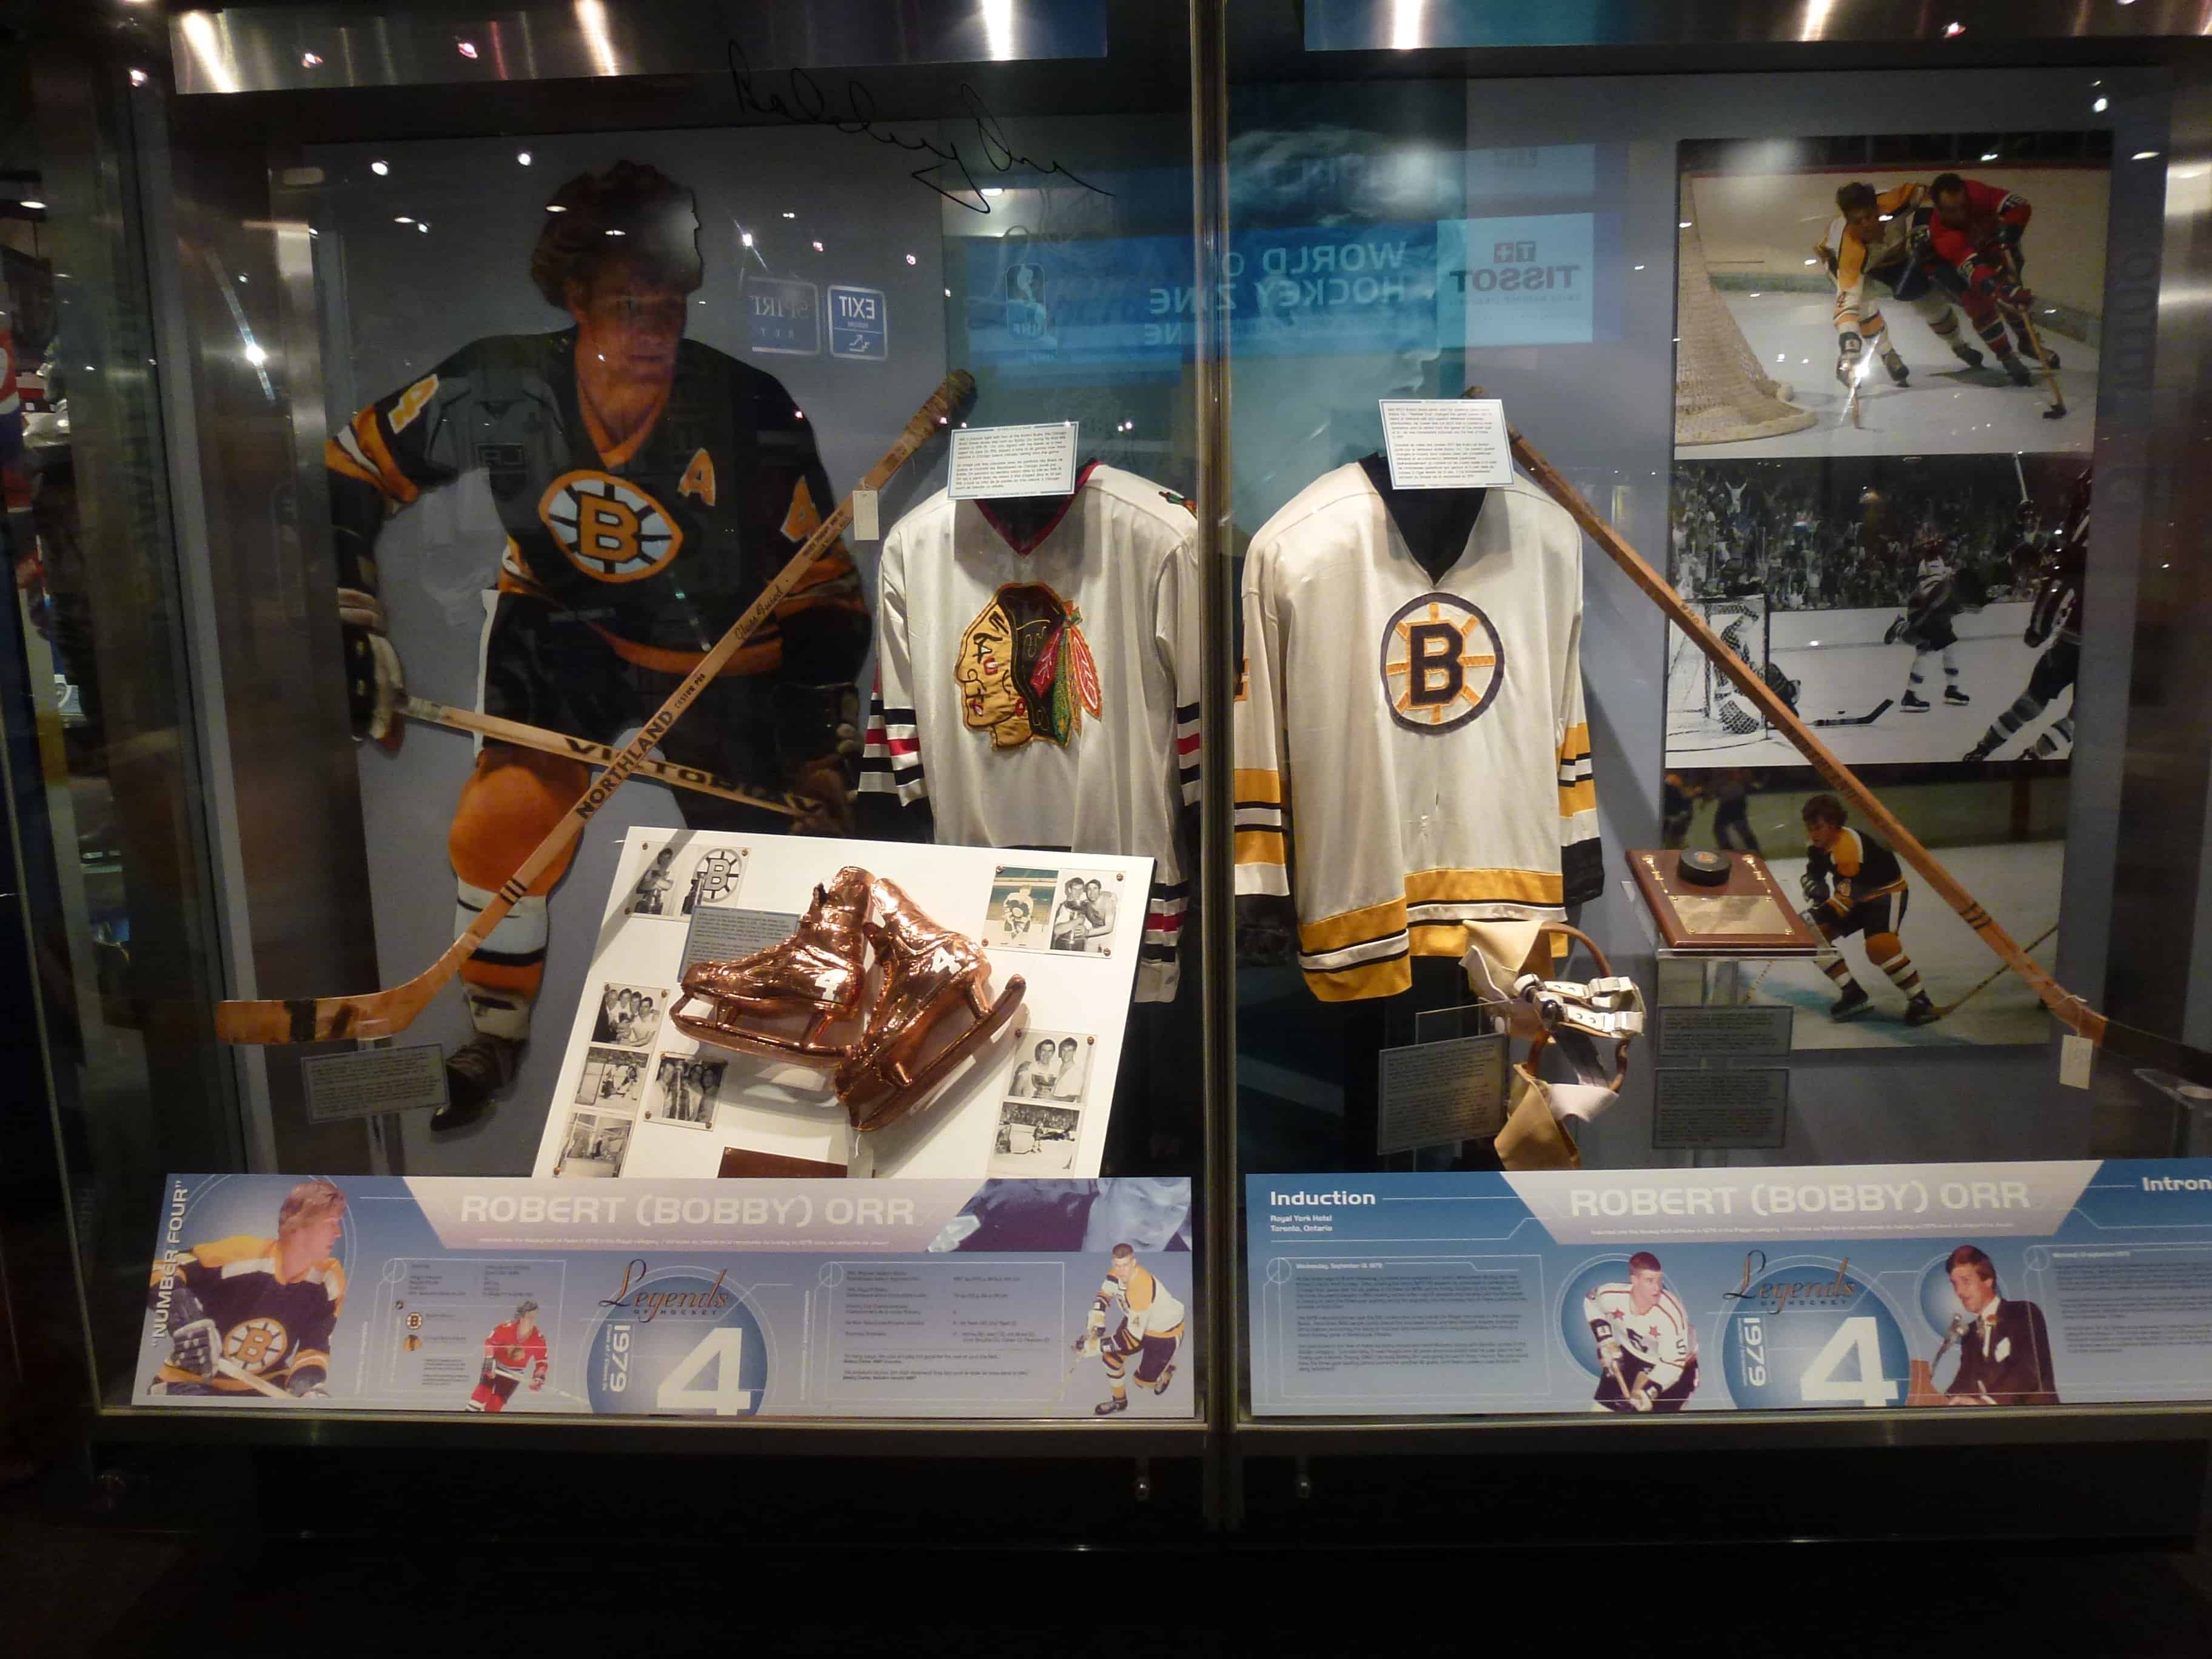 Bobby Orr display at the Hockey Hall of Fame in Toronto, Ontario, Canada